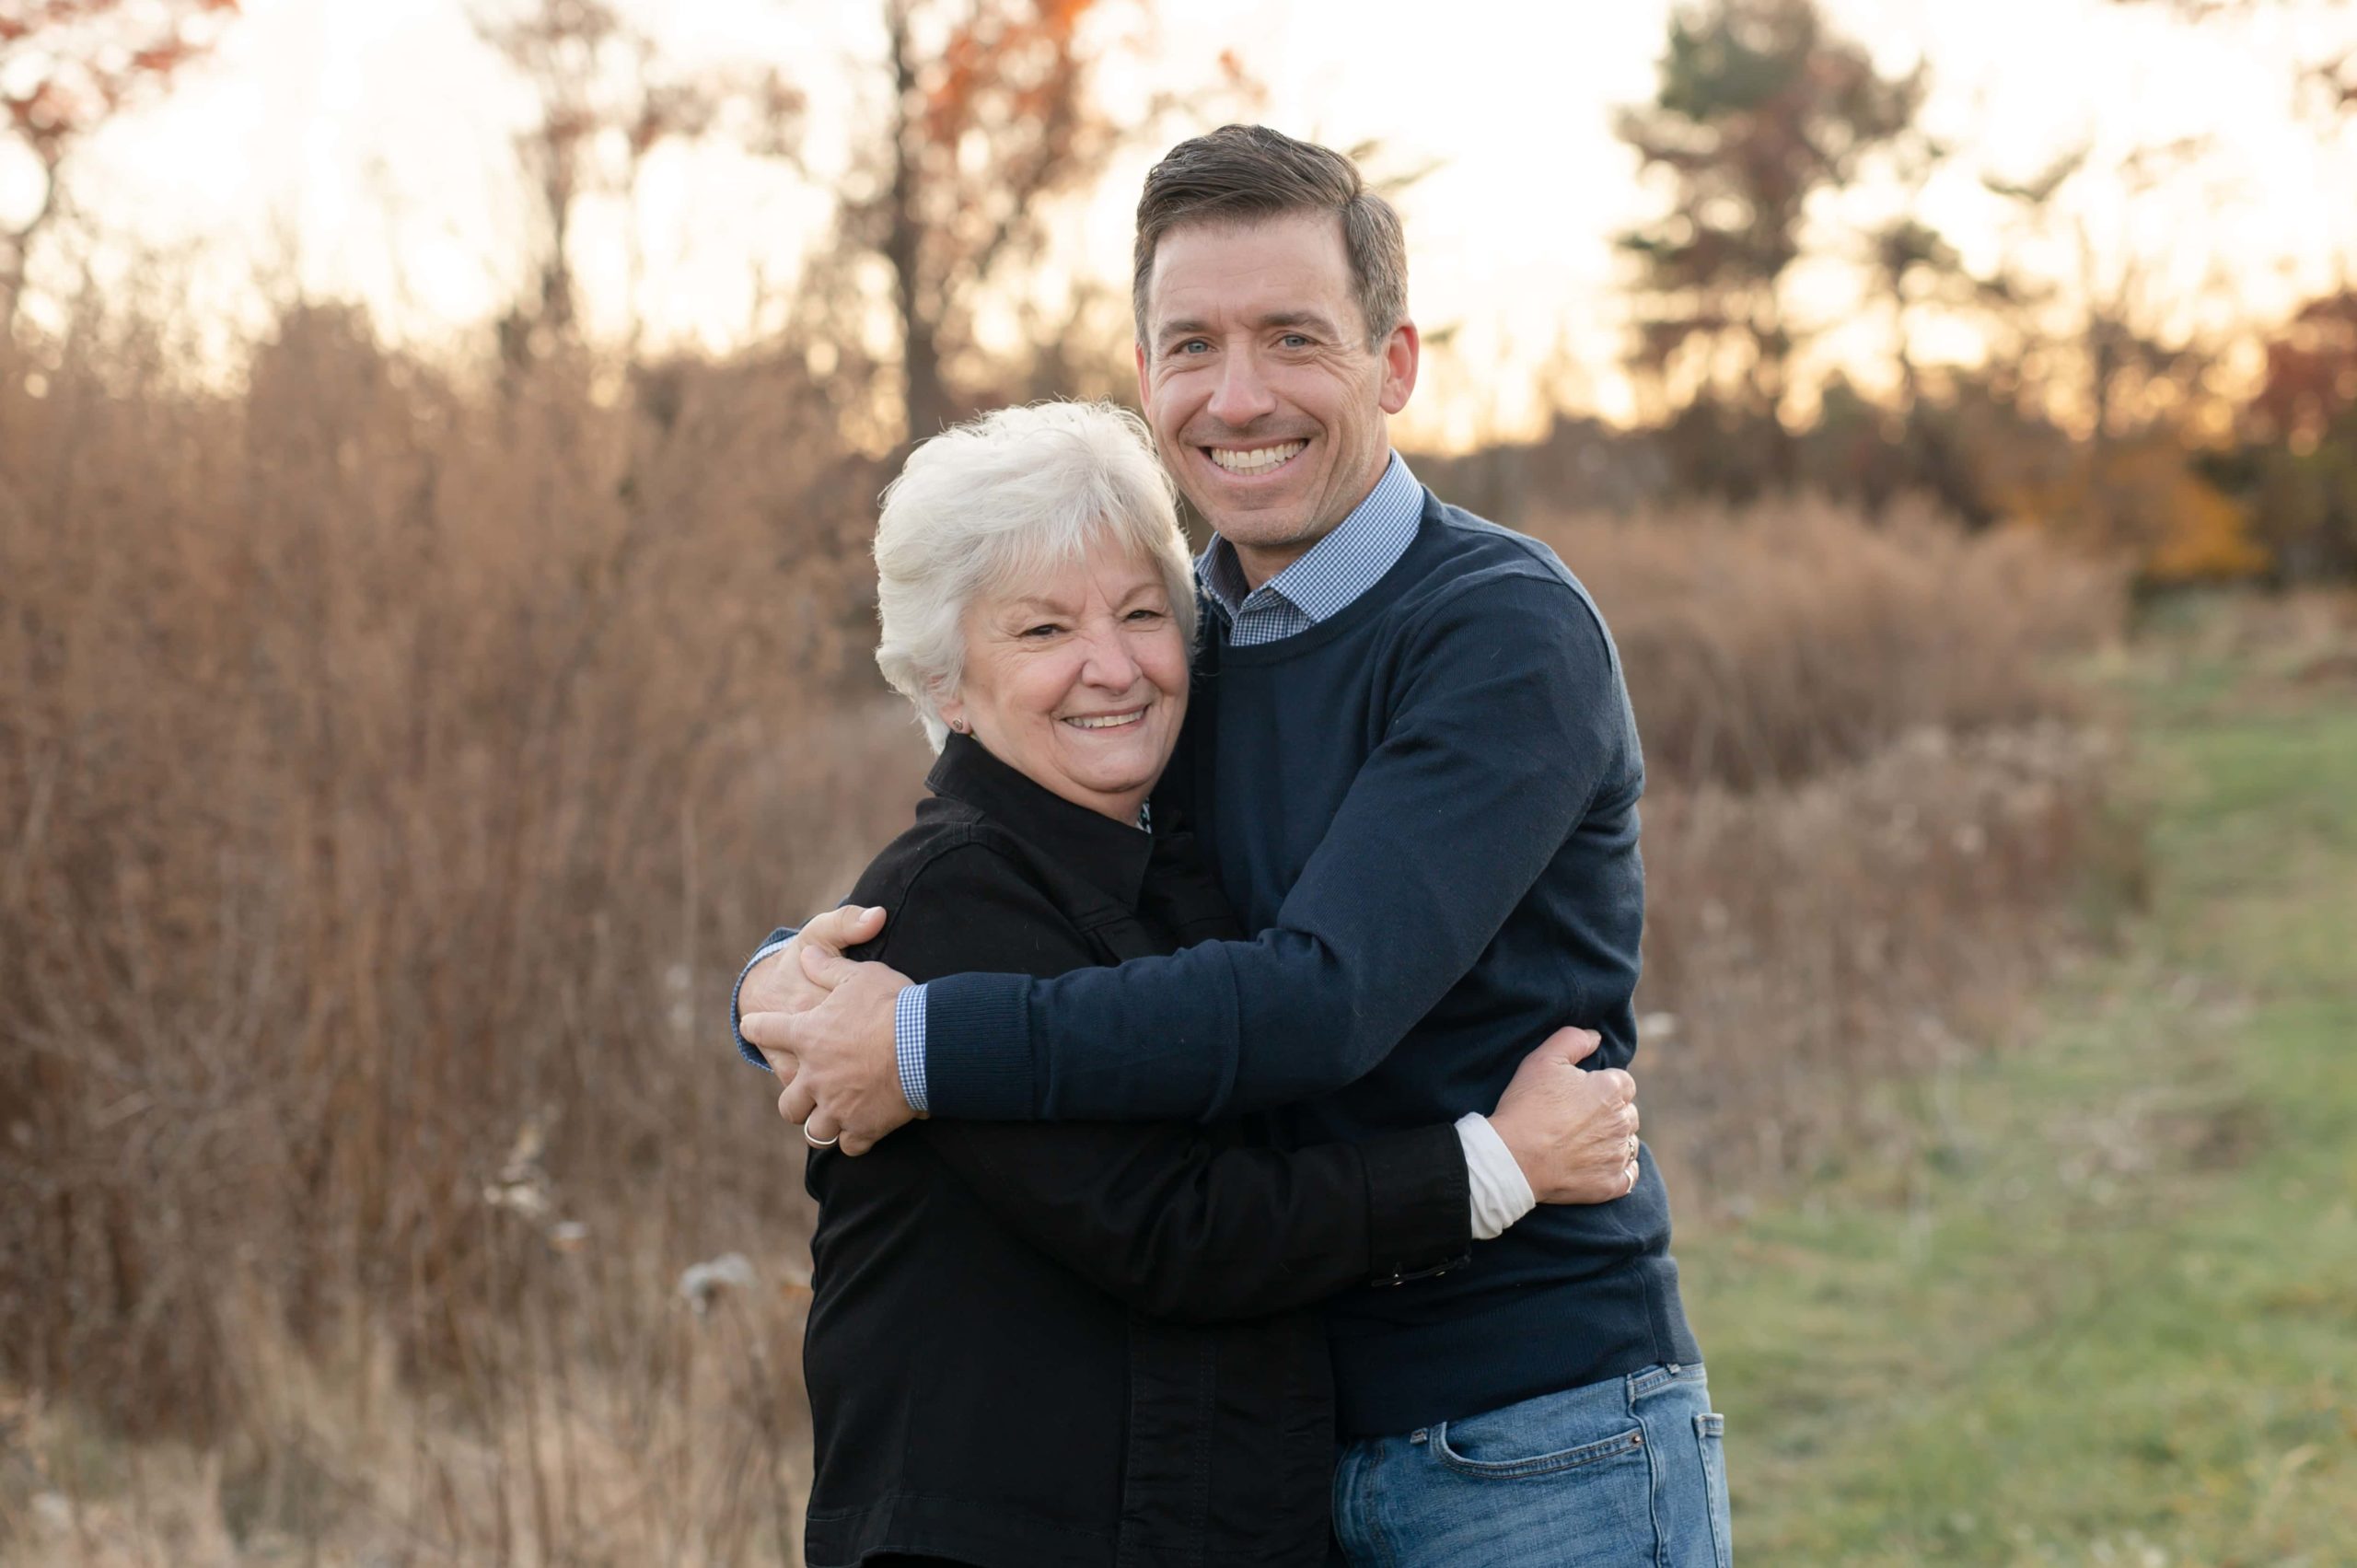 Family photos in fall with mother and son